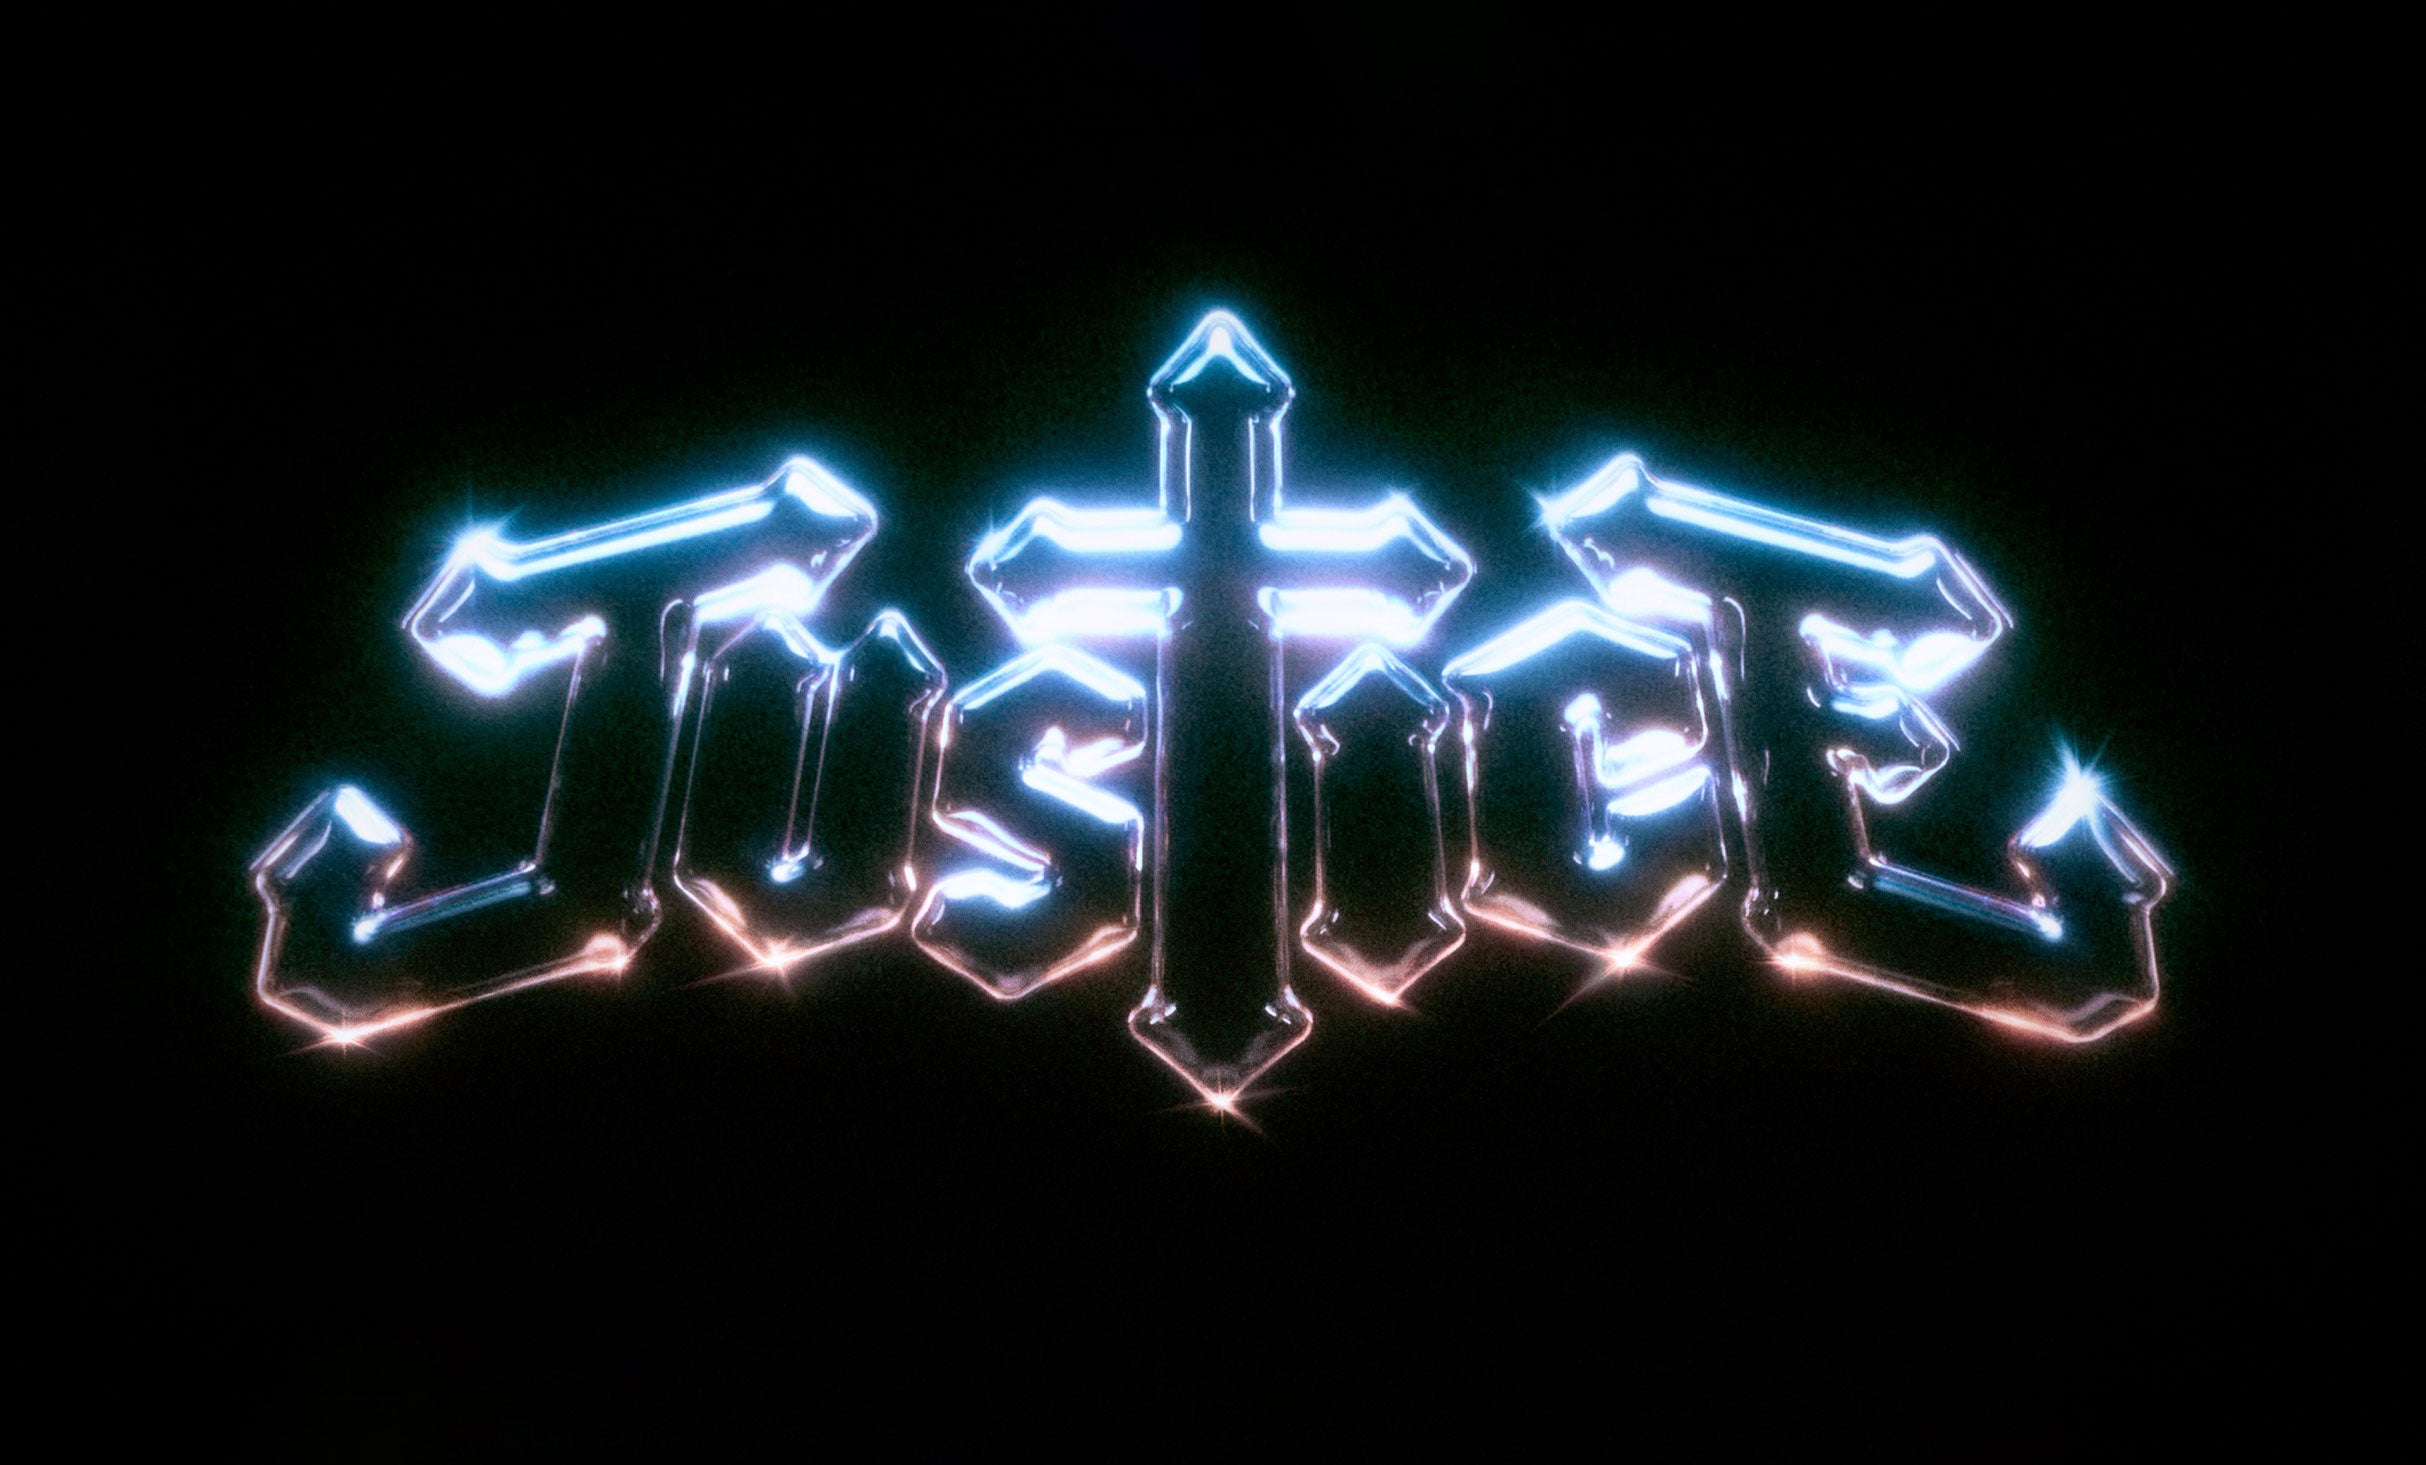 Justice: Live free pre-sale passcode for early tickets in Washington